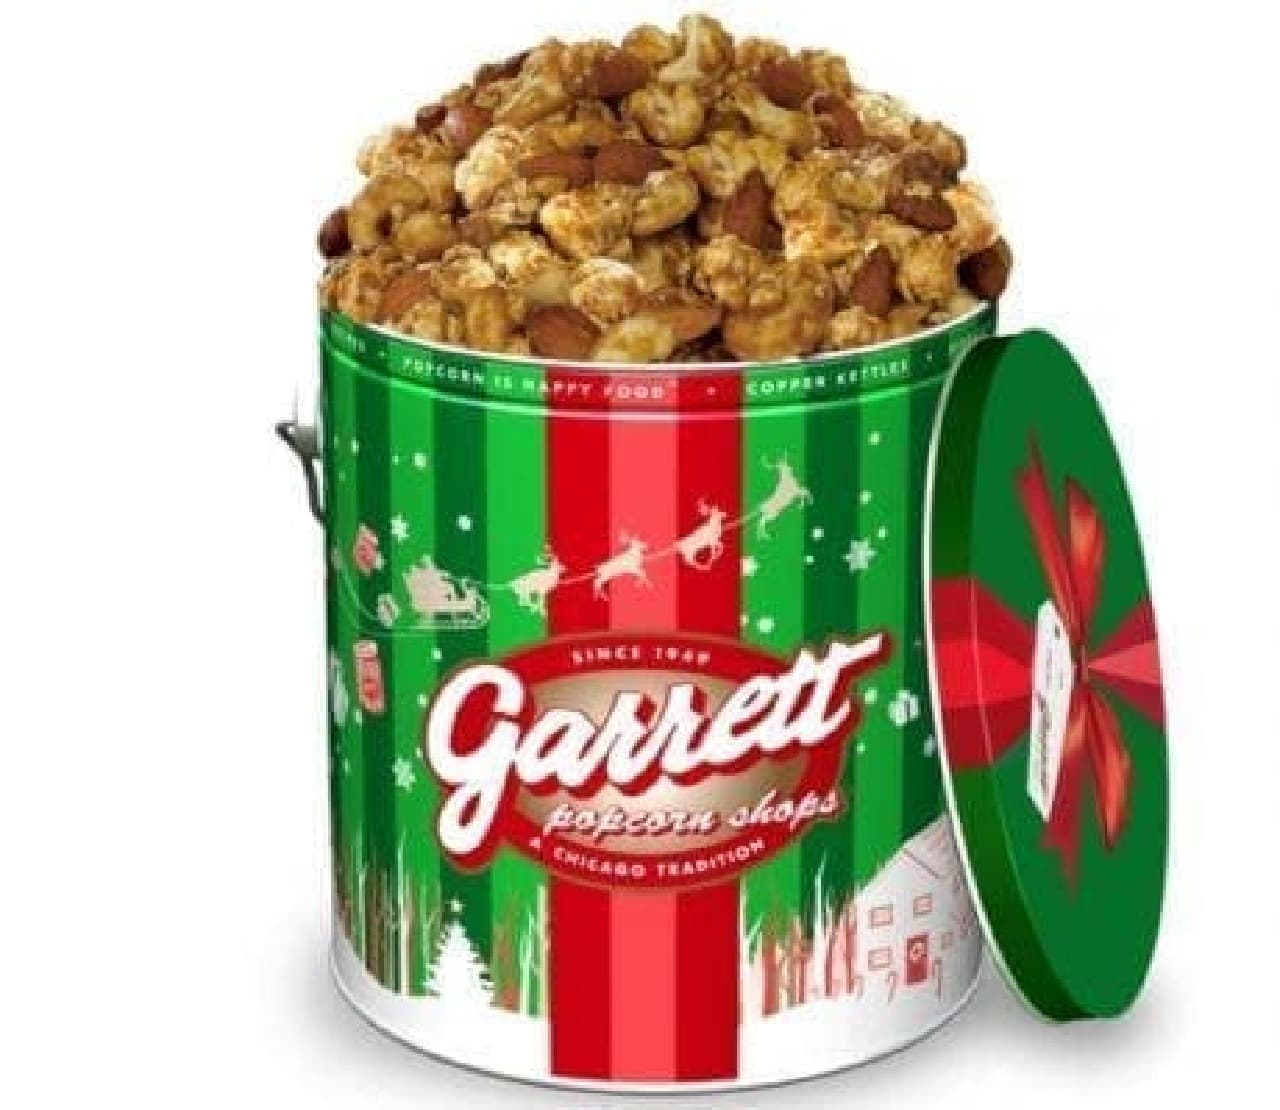 Garrett popcorn with a new flavor of "3 kinds of nuts x caramel